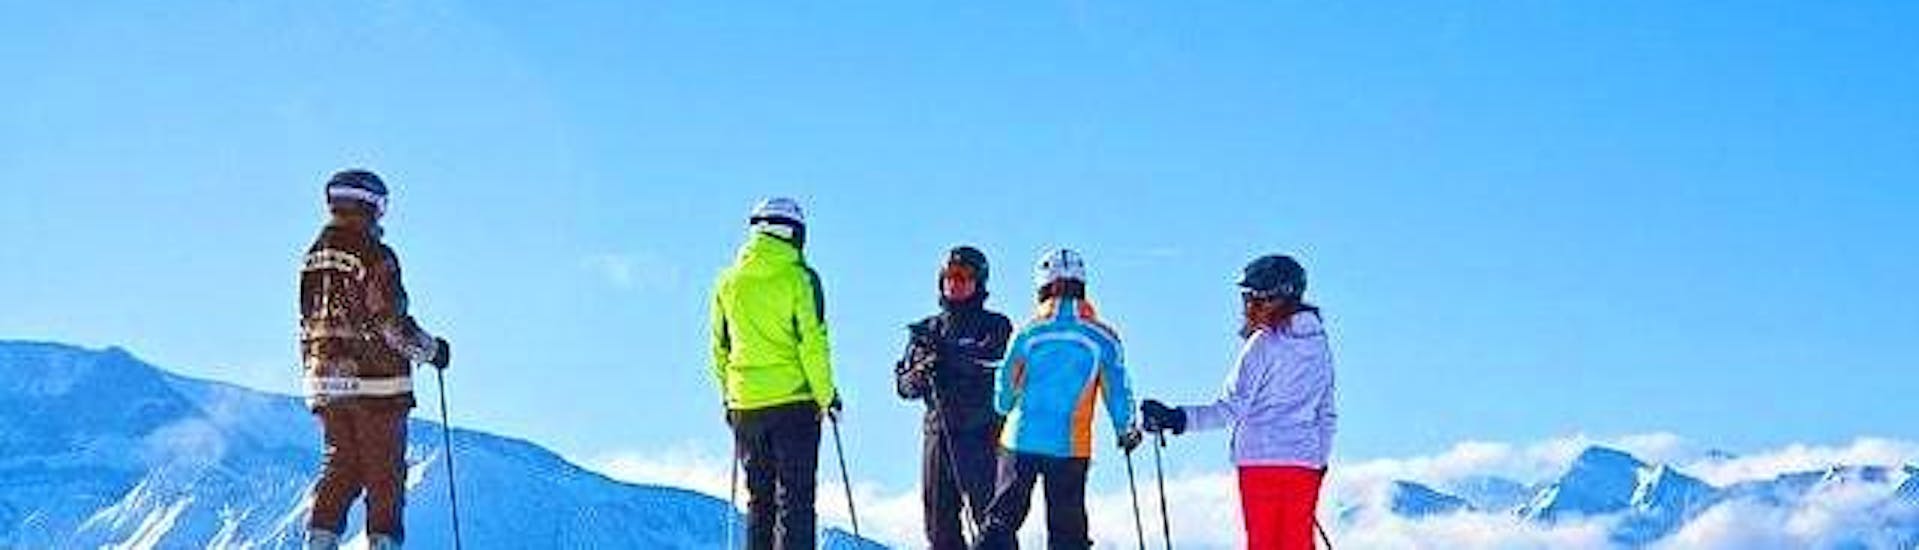 Ski Lessons for Adults - All Levels of the Ski School Scuola Italiana Sci Azzurra Folgarida are taking place, the group is ready to go down the slope.